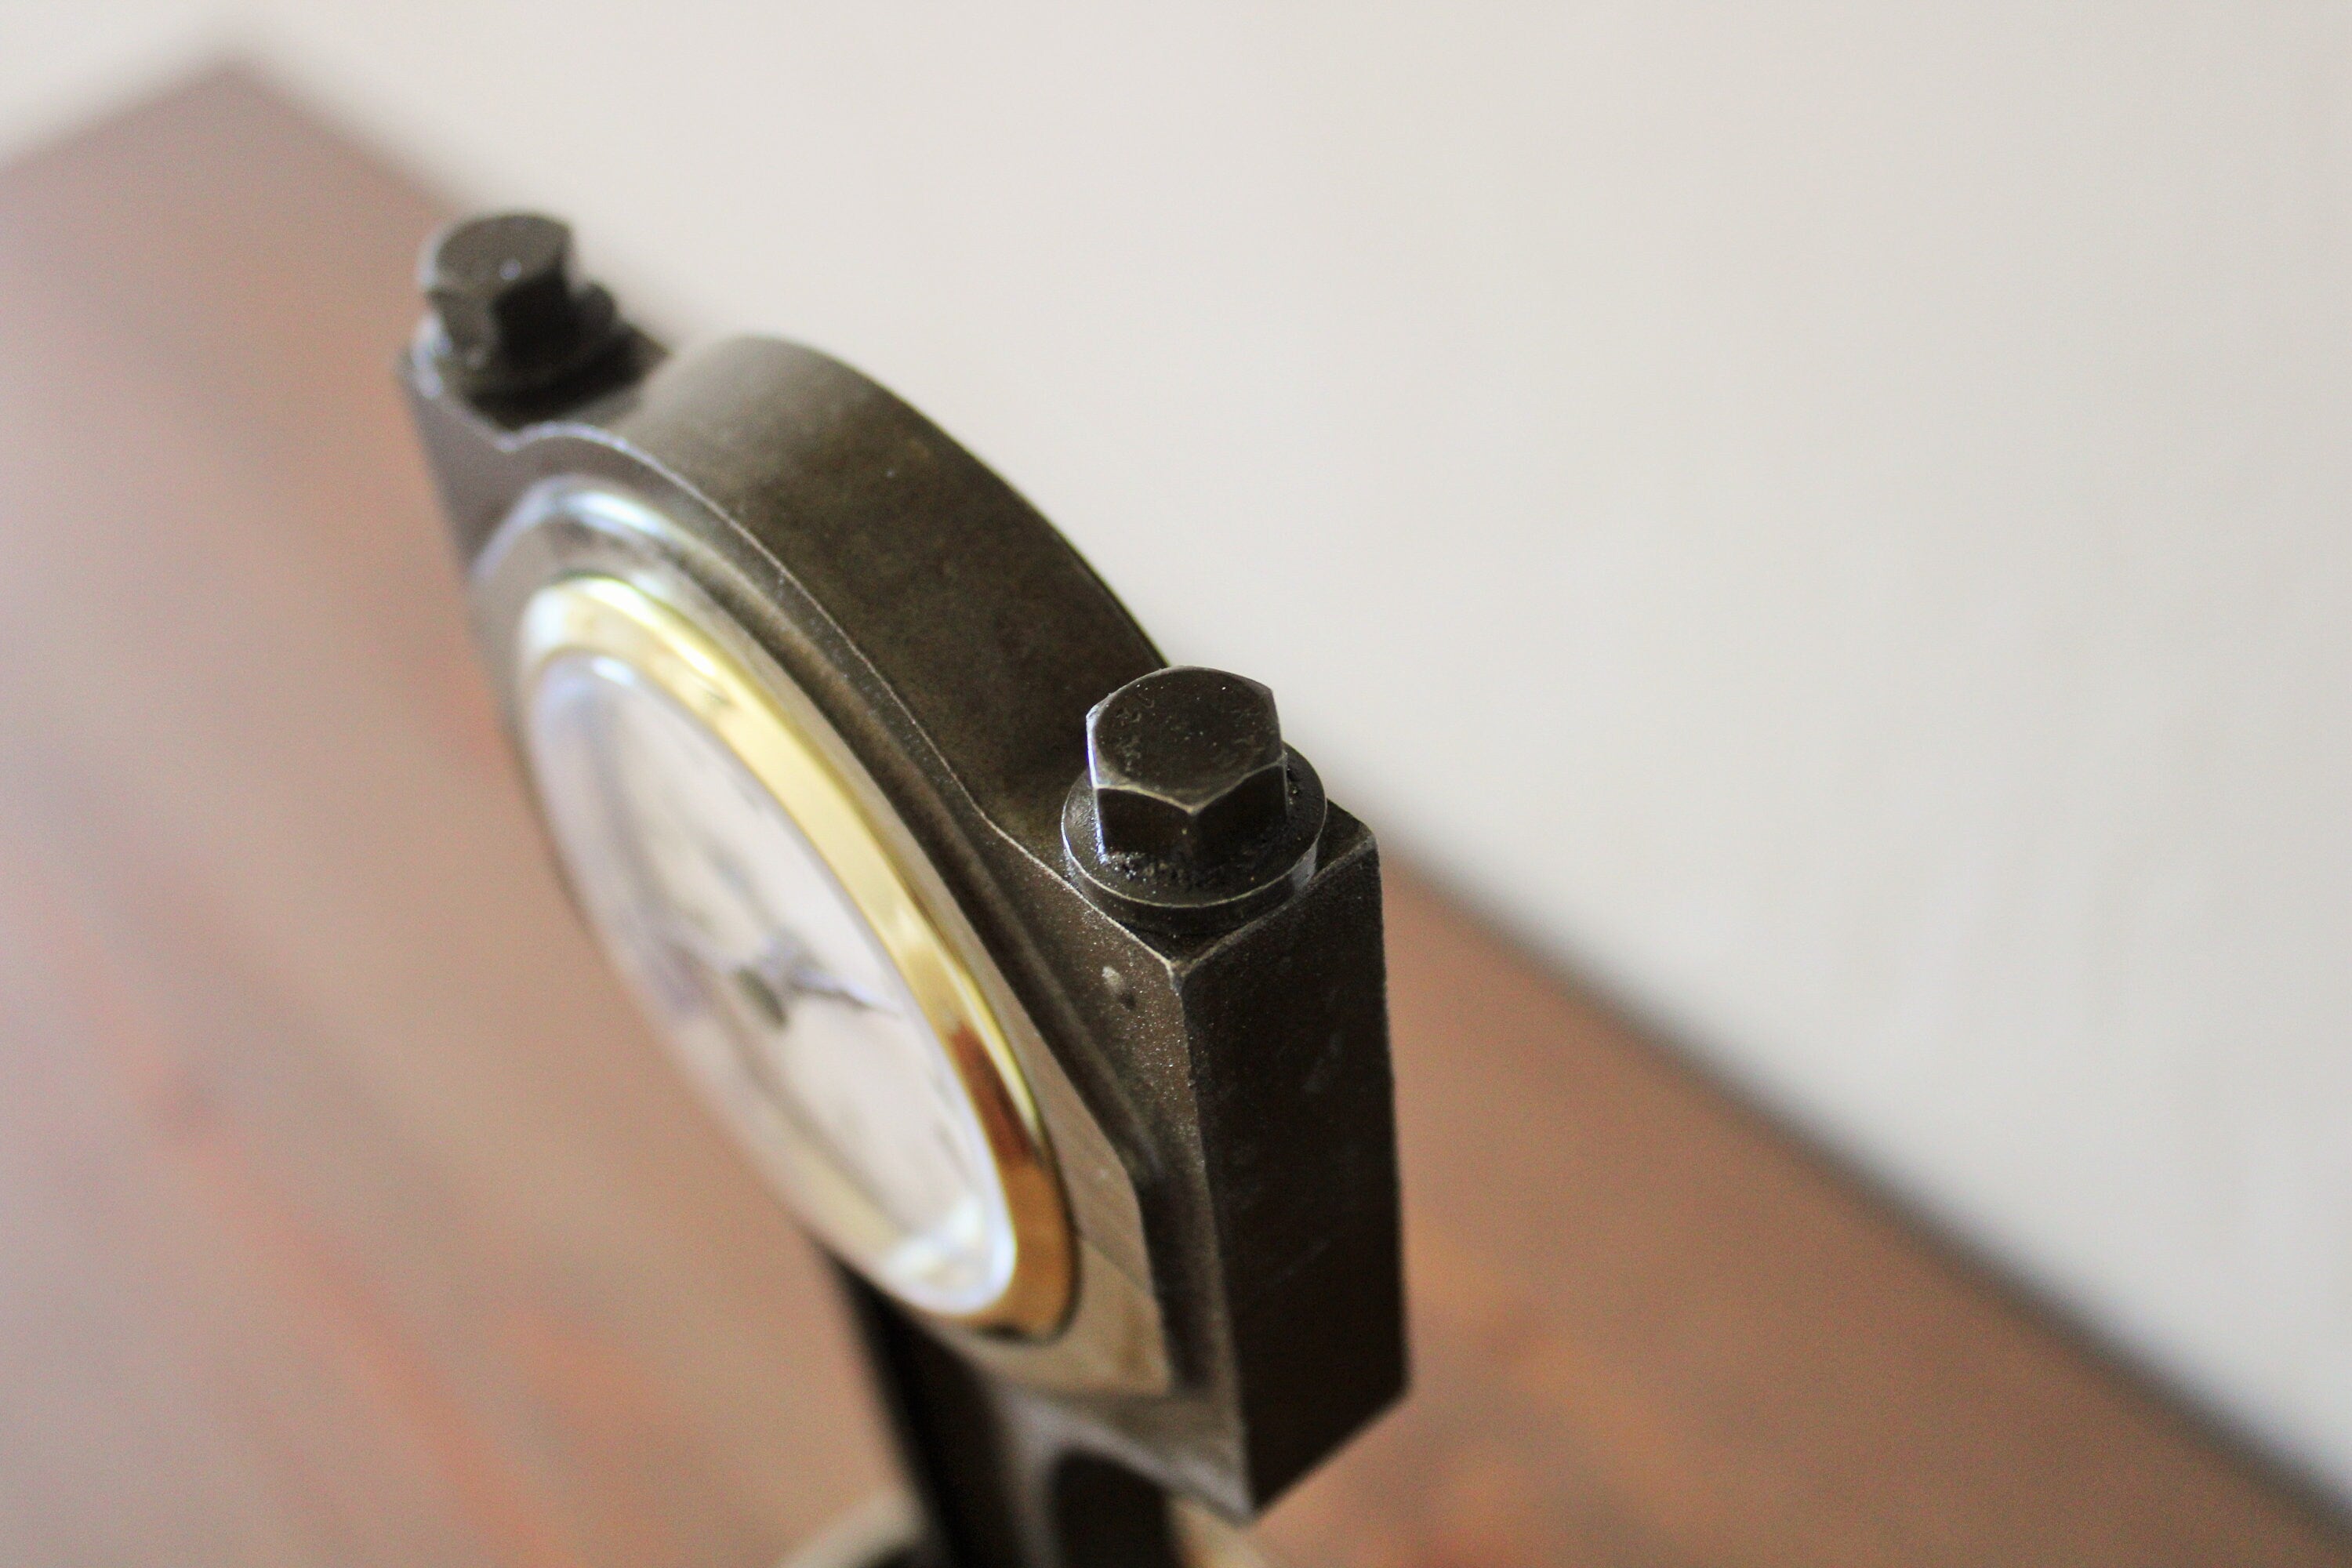 Close-up view of a piston clock made out of a Jaguar car's piston with a patina finish and gold clock ring.